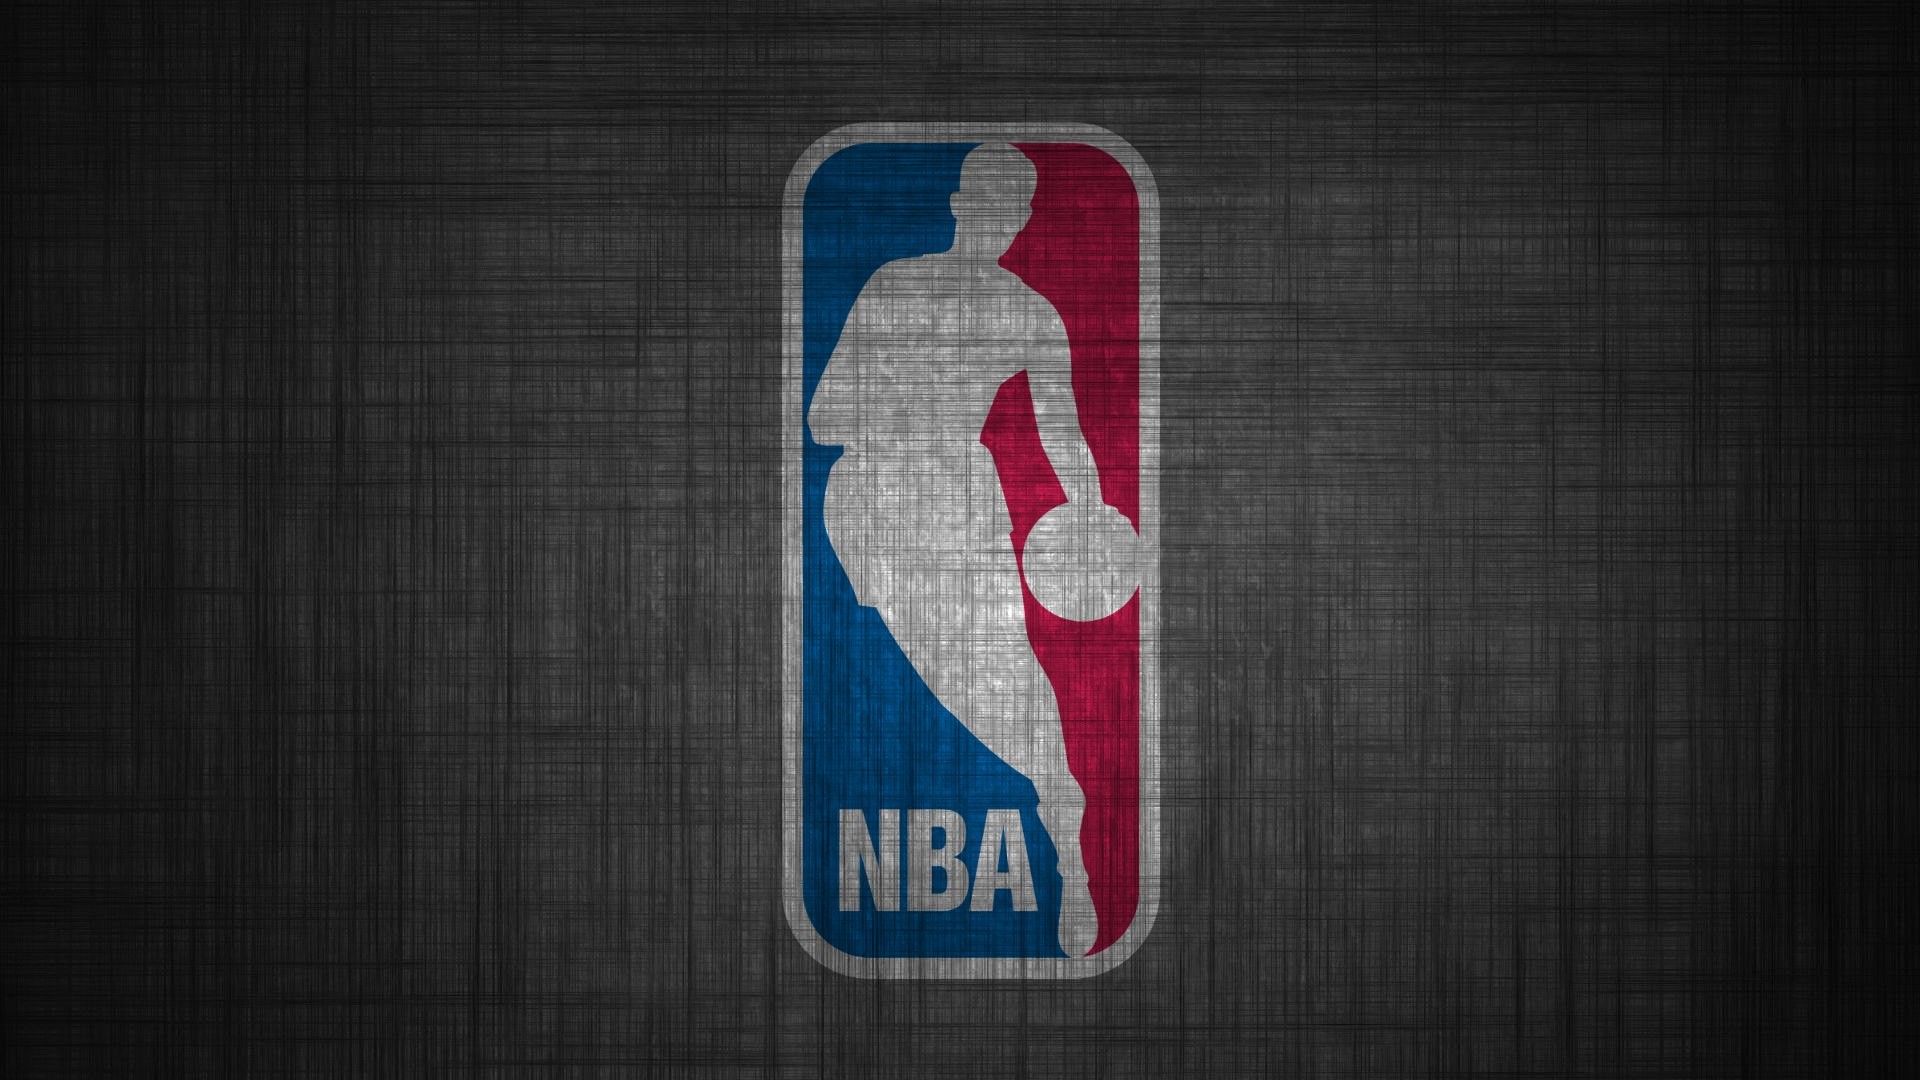 Basketball Desktop Wallpaper with image dimensions 1920x1080 pixel. You can make this wallpaper for your Desktop Computer Backgrounds, Windows or Mac Screensavers, iPhone Lock screen, Tablet or Android and another Mobile Phone device